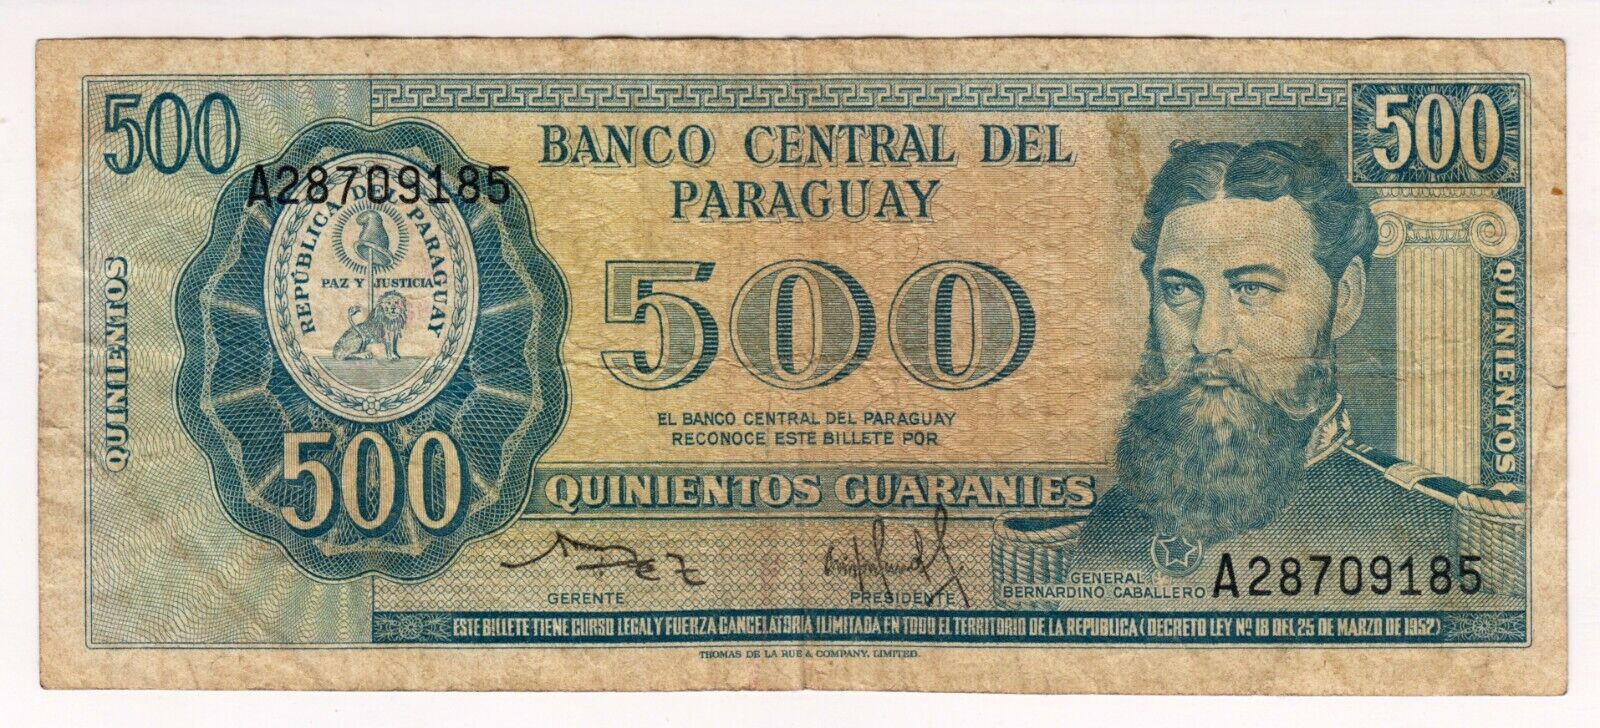 1952 Paraguay 500 Guaranies 28709185 Paper Banknote Money Currency